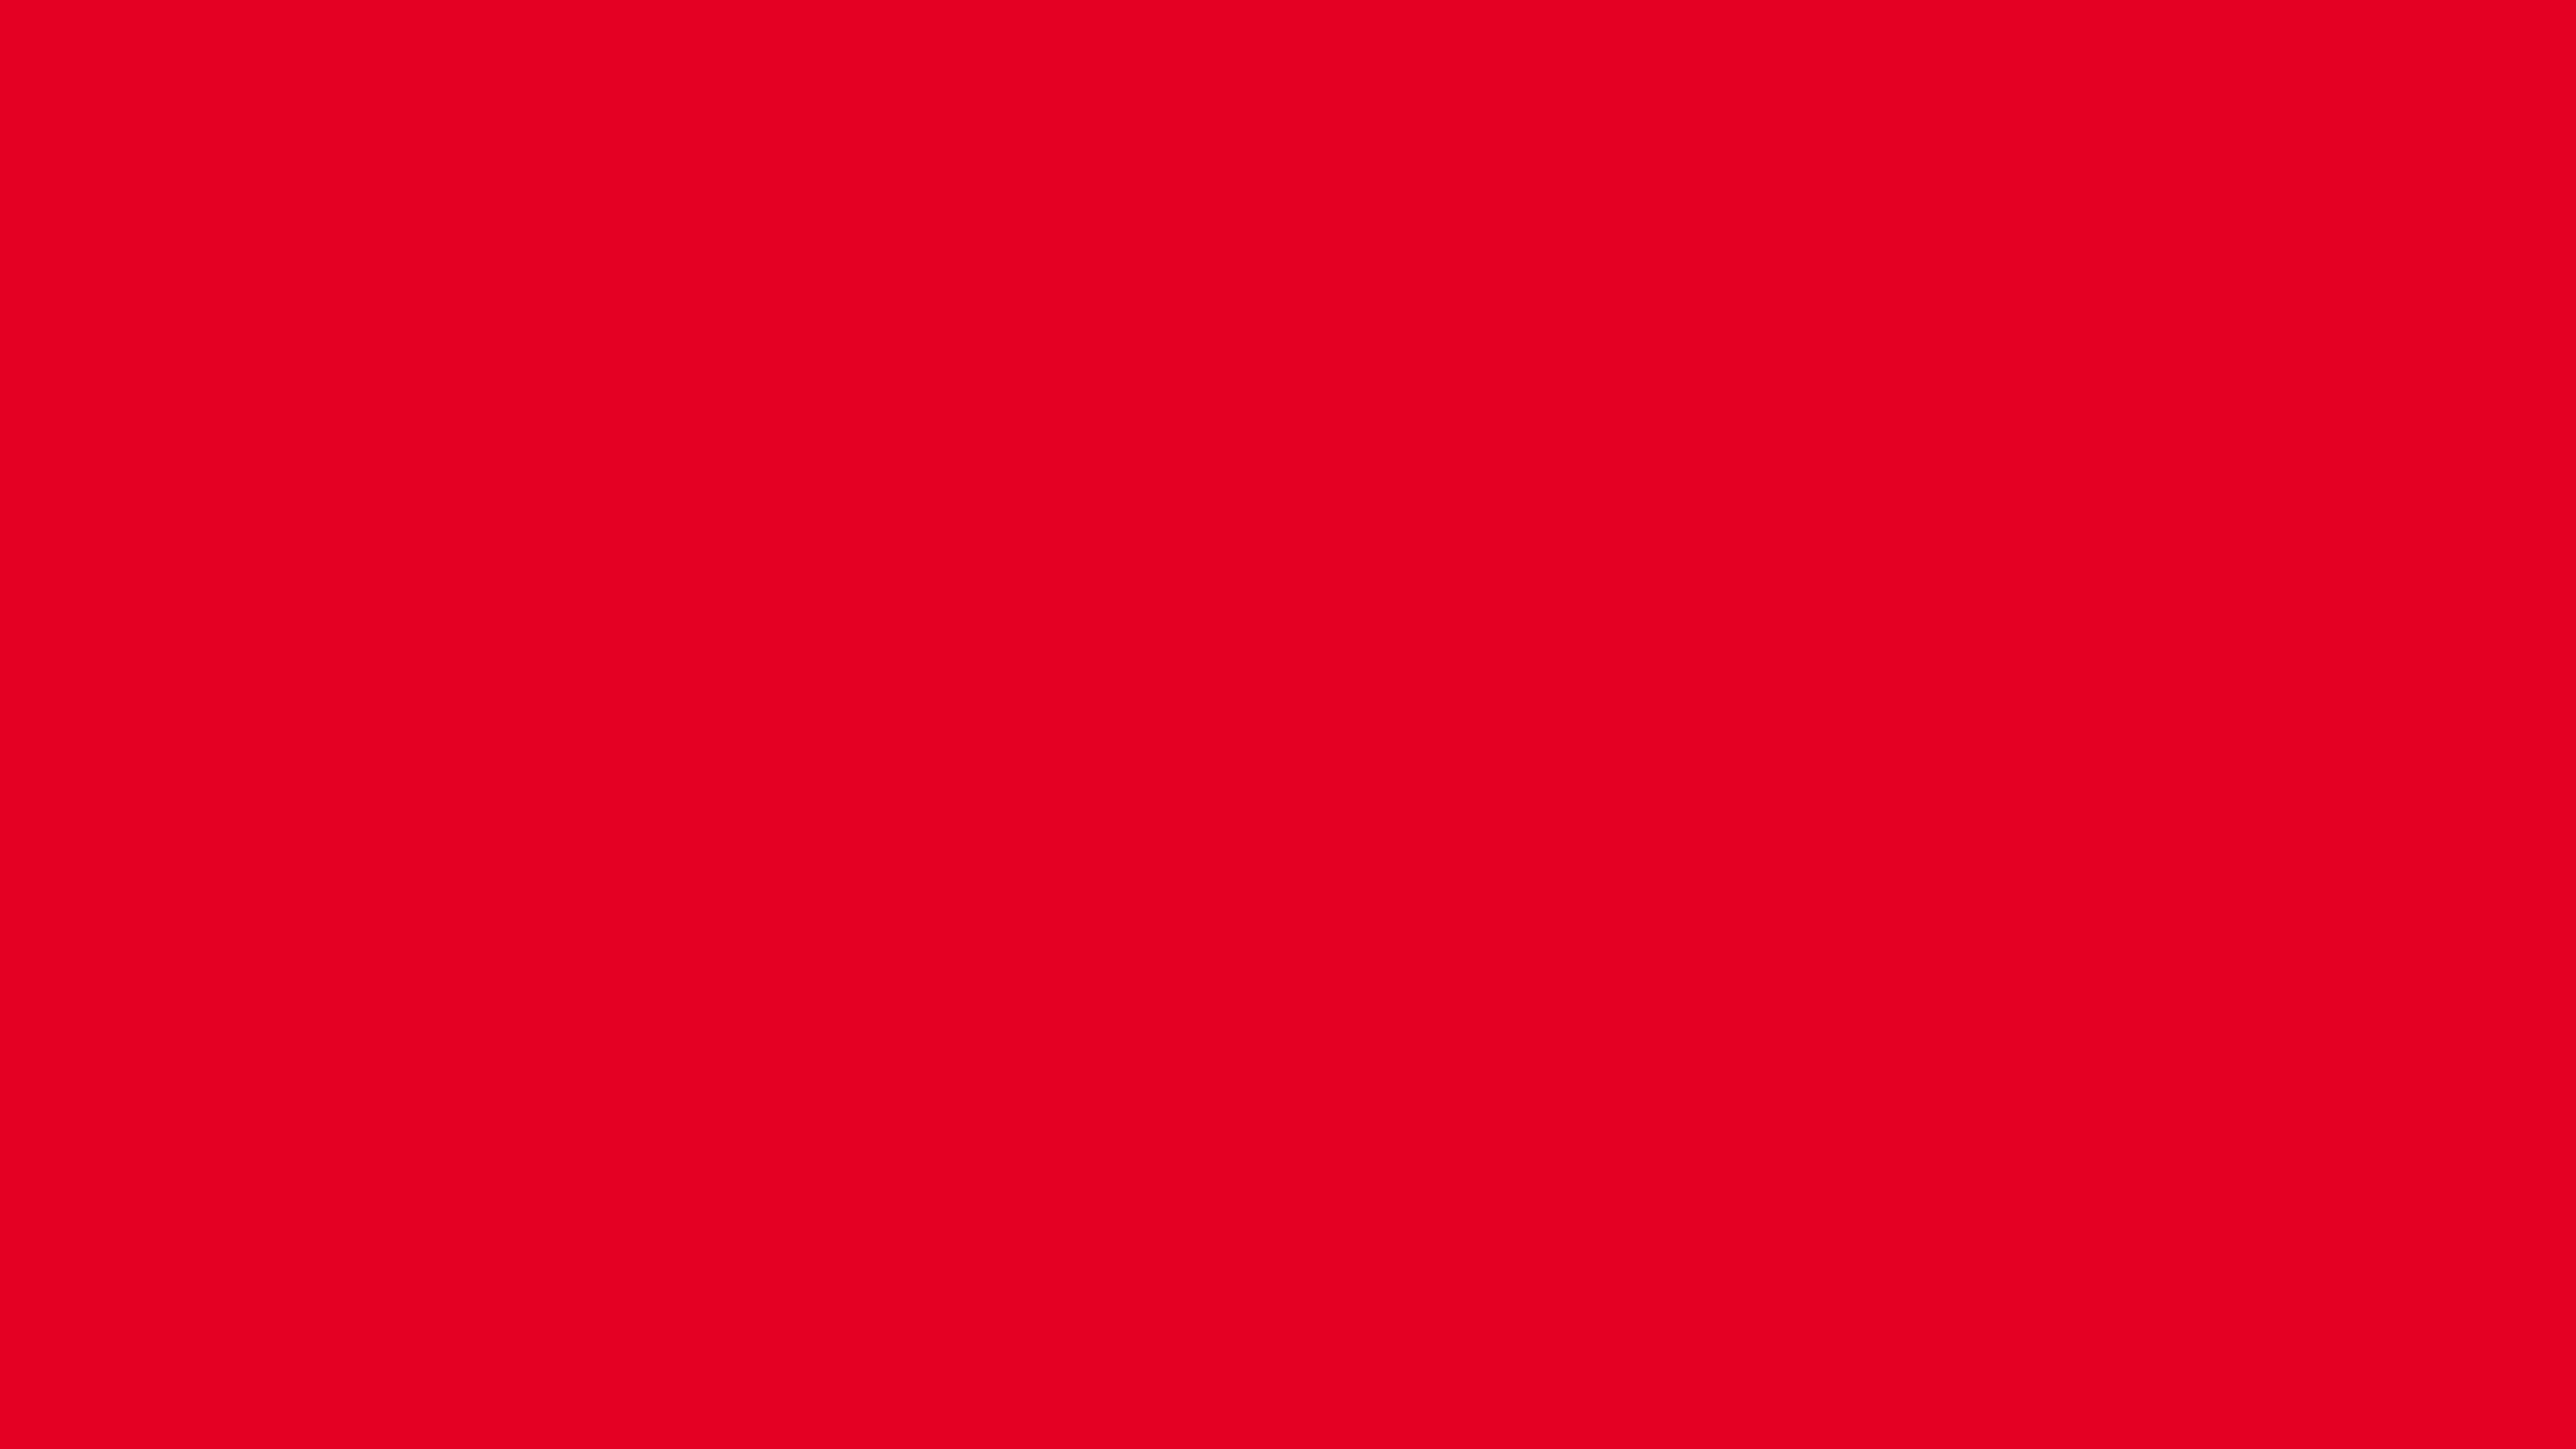 3840x2160 Cadmium Red Solid Color Background